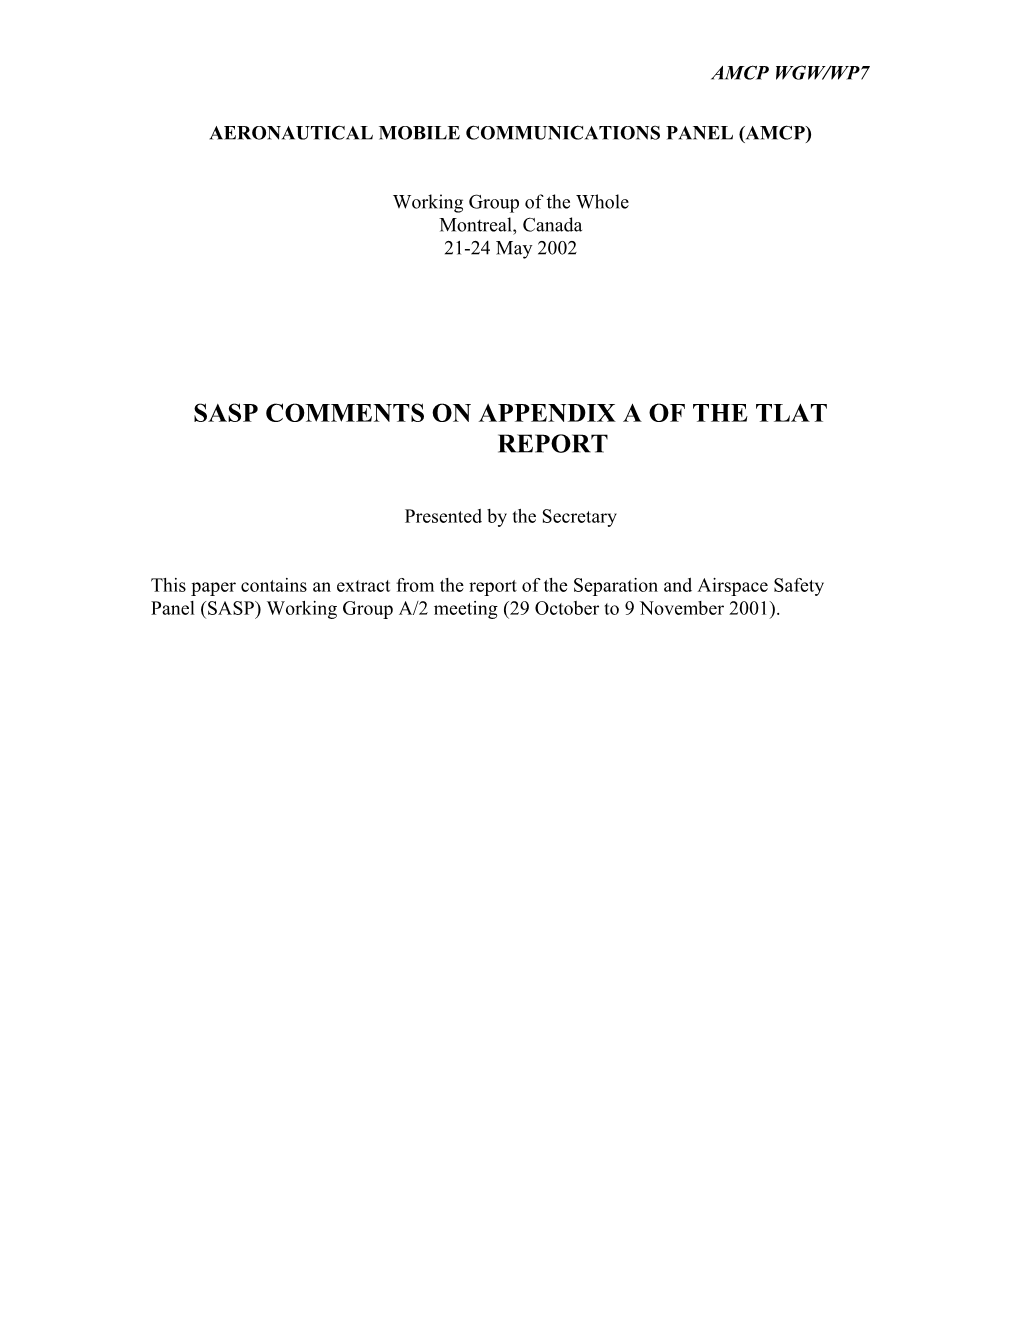 Sasp Comments on Appendix a of the Tlat Report